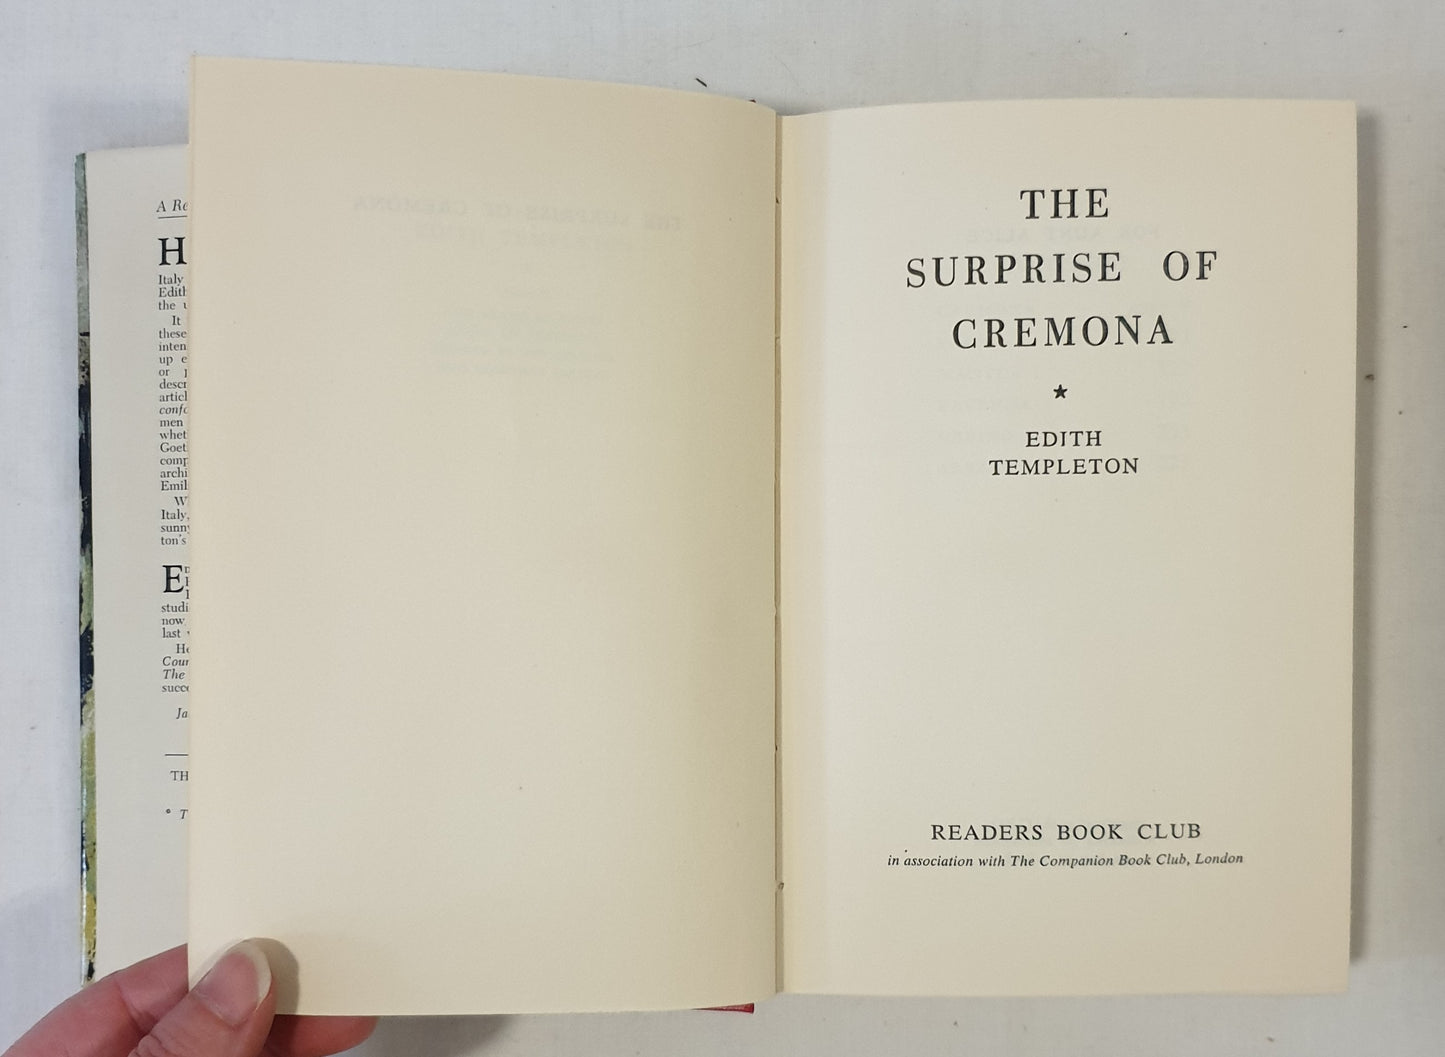 The Surprise of Cremona by Edith Templeton